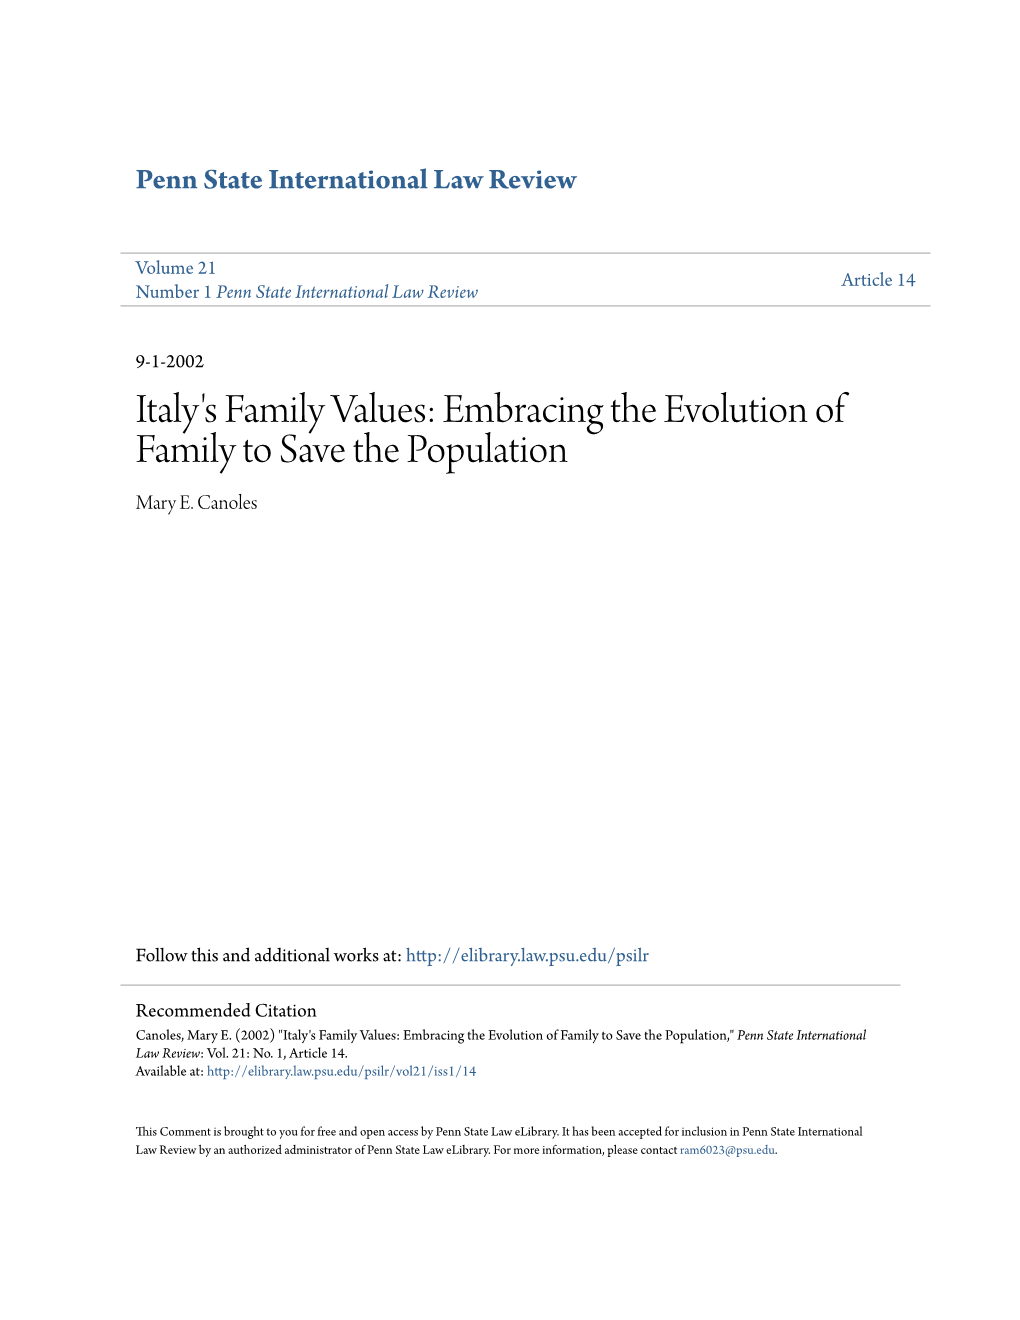 Italy's Family Values: Embracing the Evolution of Family to Save the Population Mary E